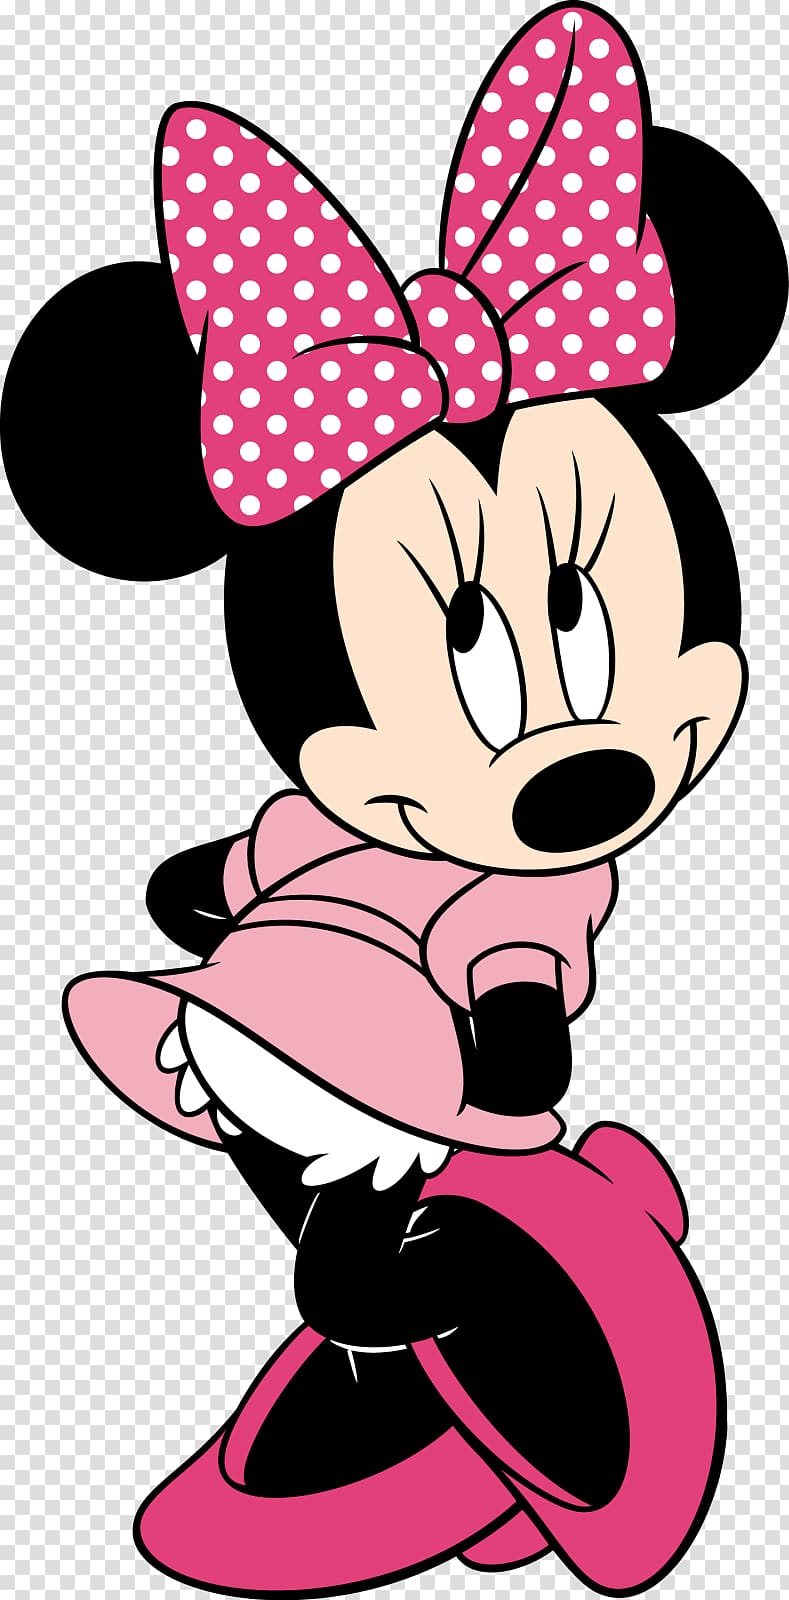 Mickey Mouse Png, Mickey Mouse Clipart, Minnie Mouse Png, Minnie